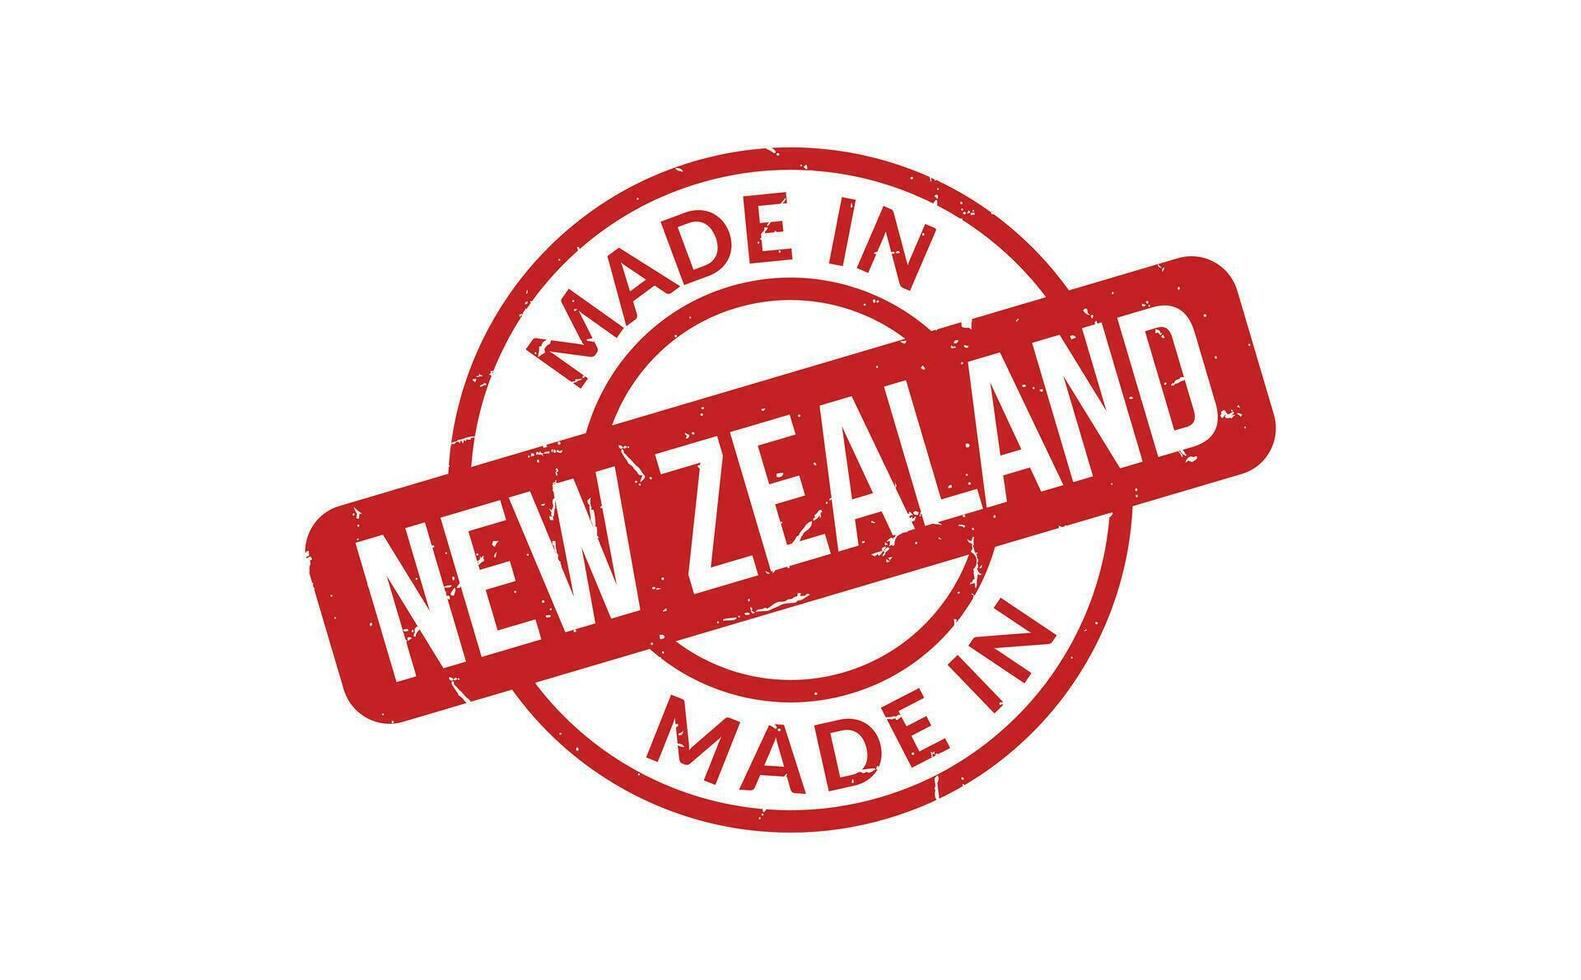 Made In New Zealand Rubber Stamp vector